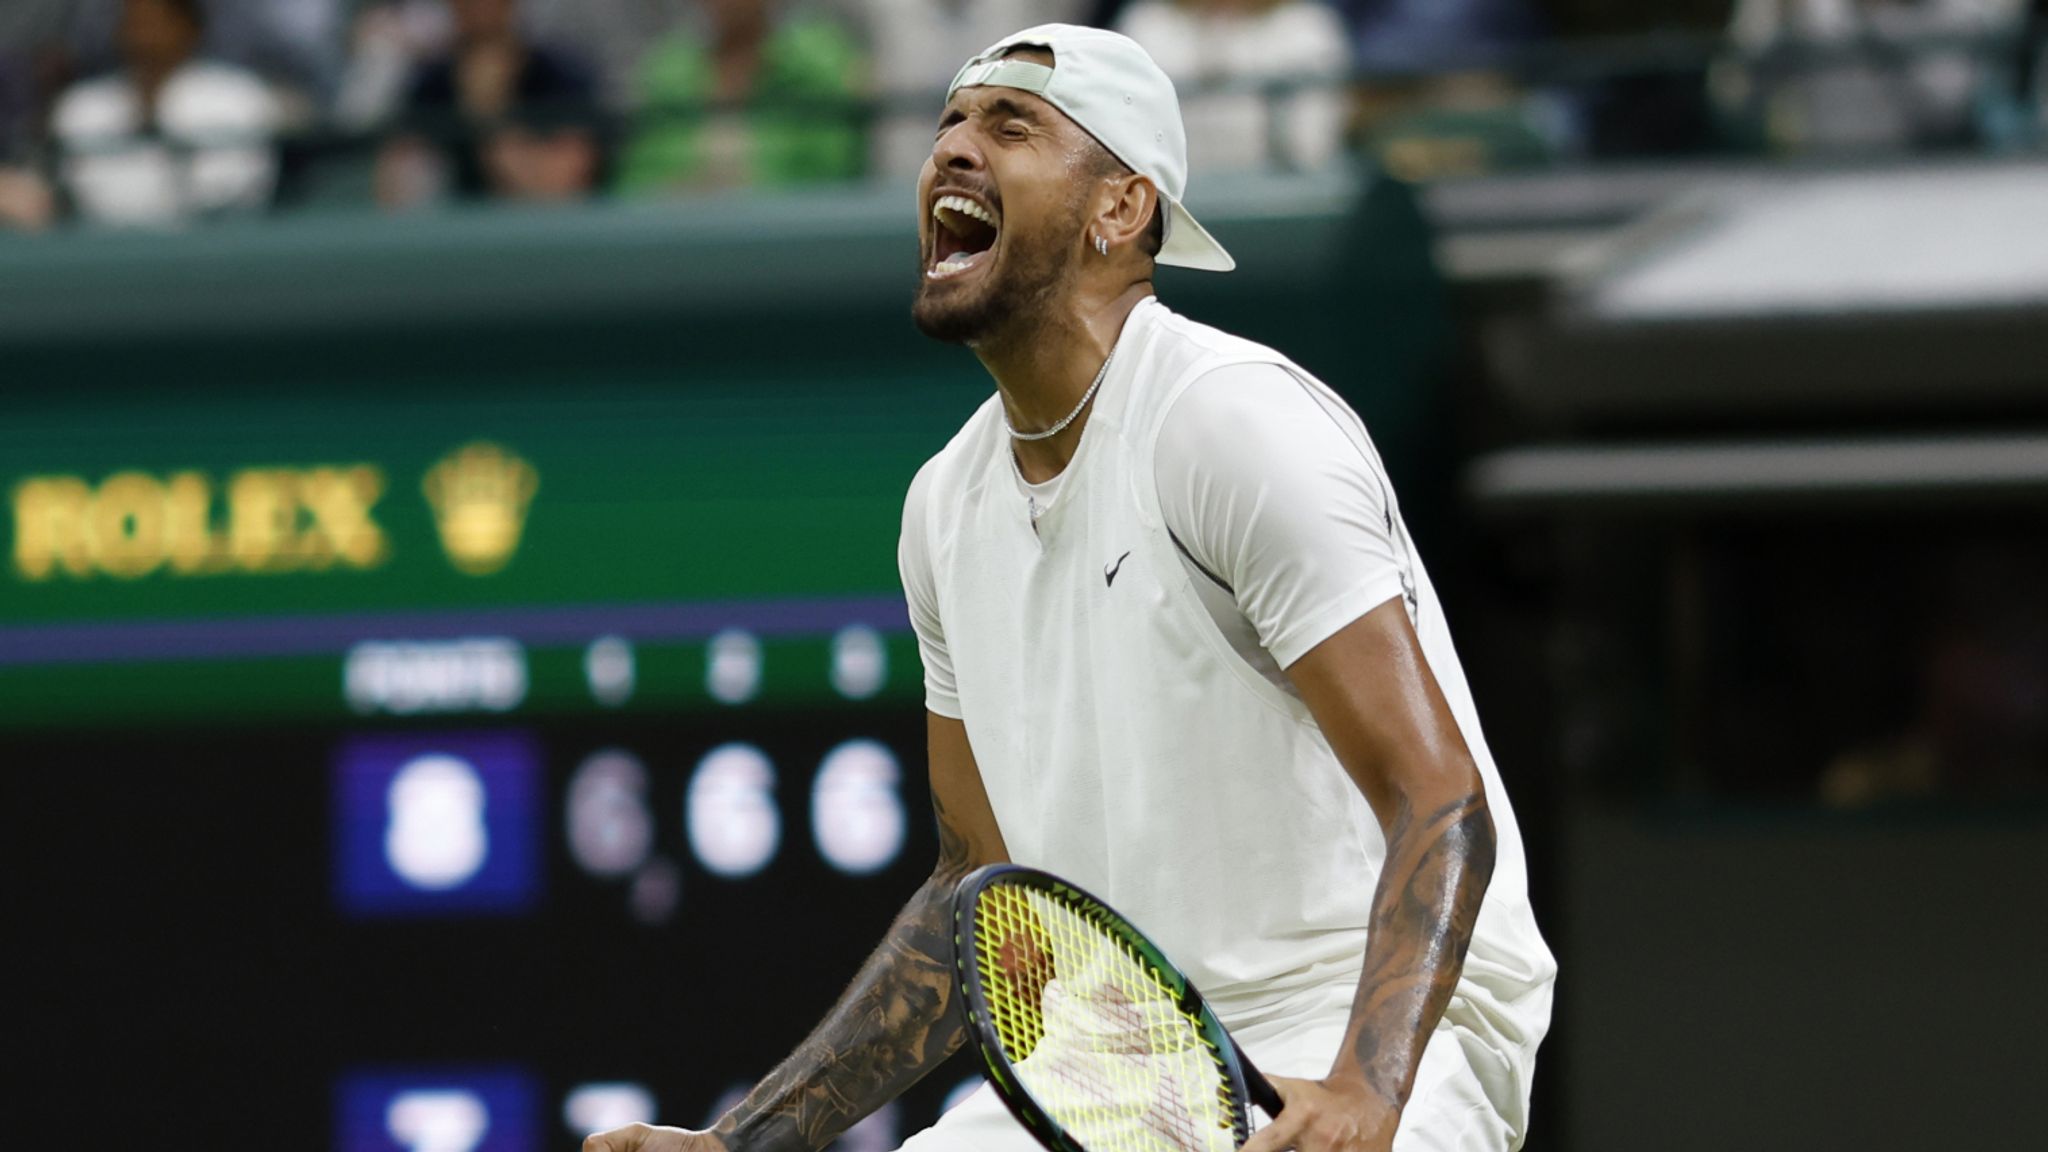 Wimbledon Nick Kyrgios joins Rafael Nadal in the second week of the